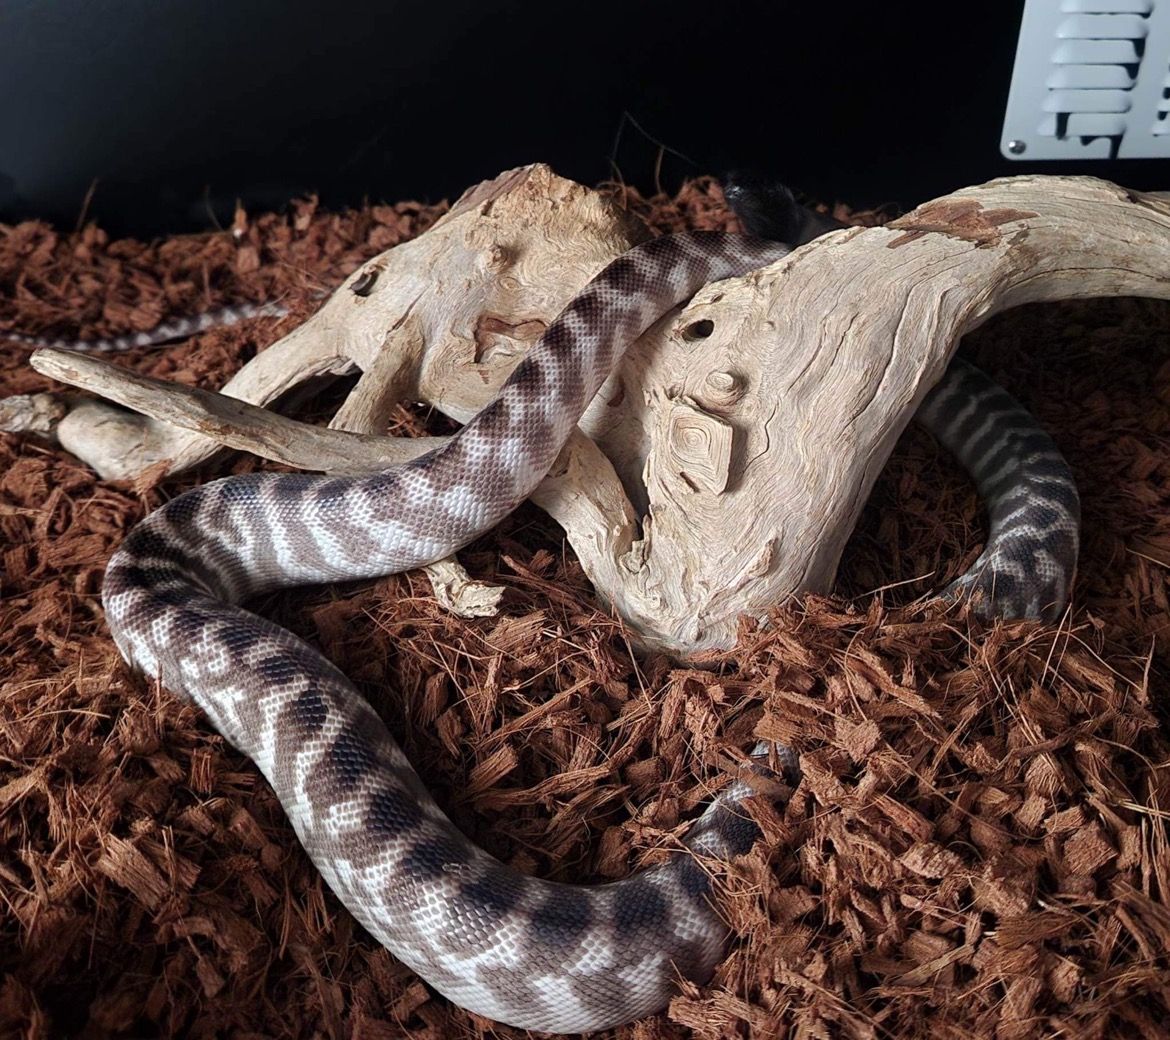 Black Headed Python burrowing in coconut husk substrate